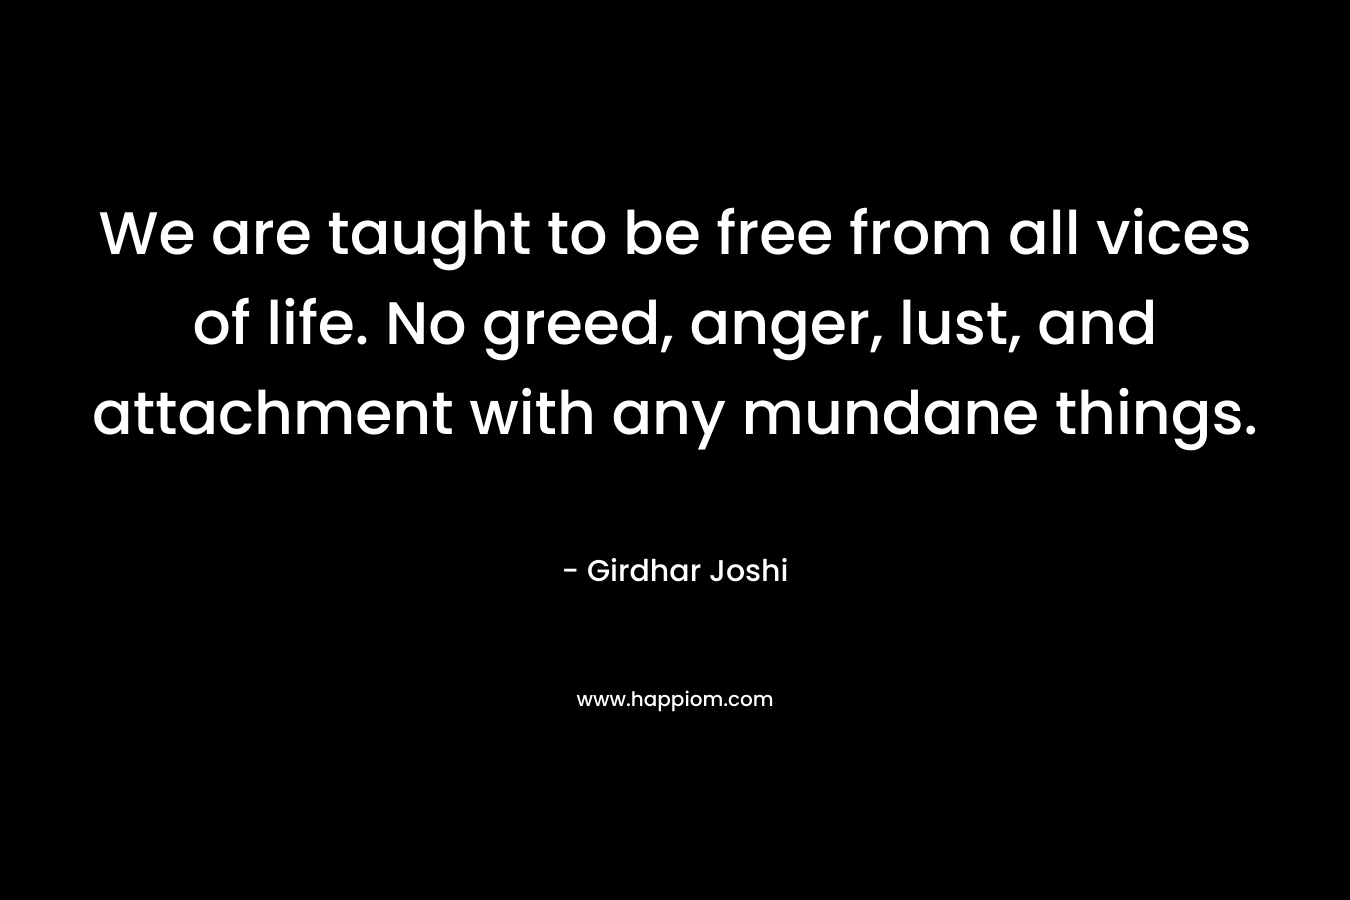 We are taught to be free from all vices of life. No greed, anger, lust, and attachment with any mundane things.